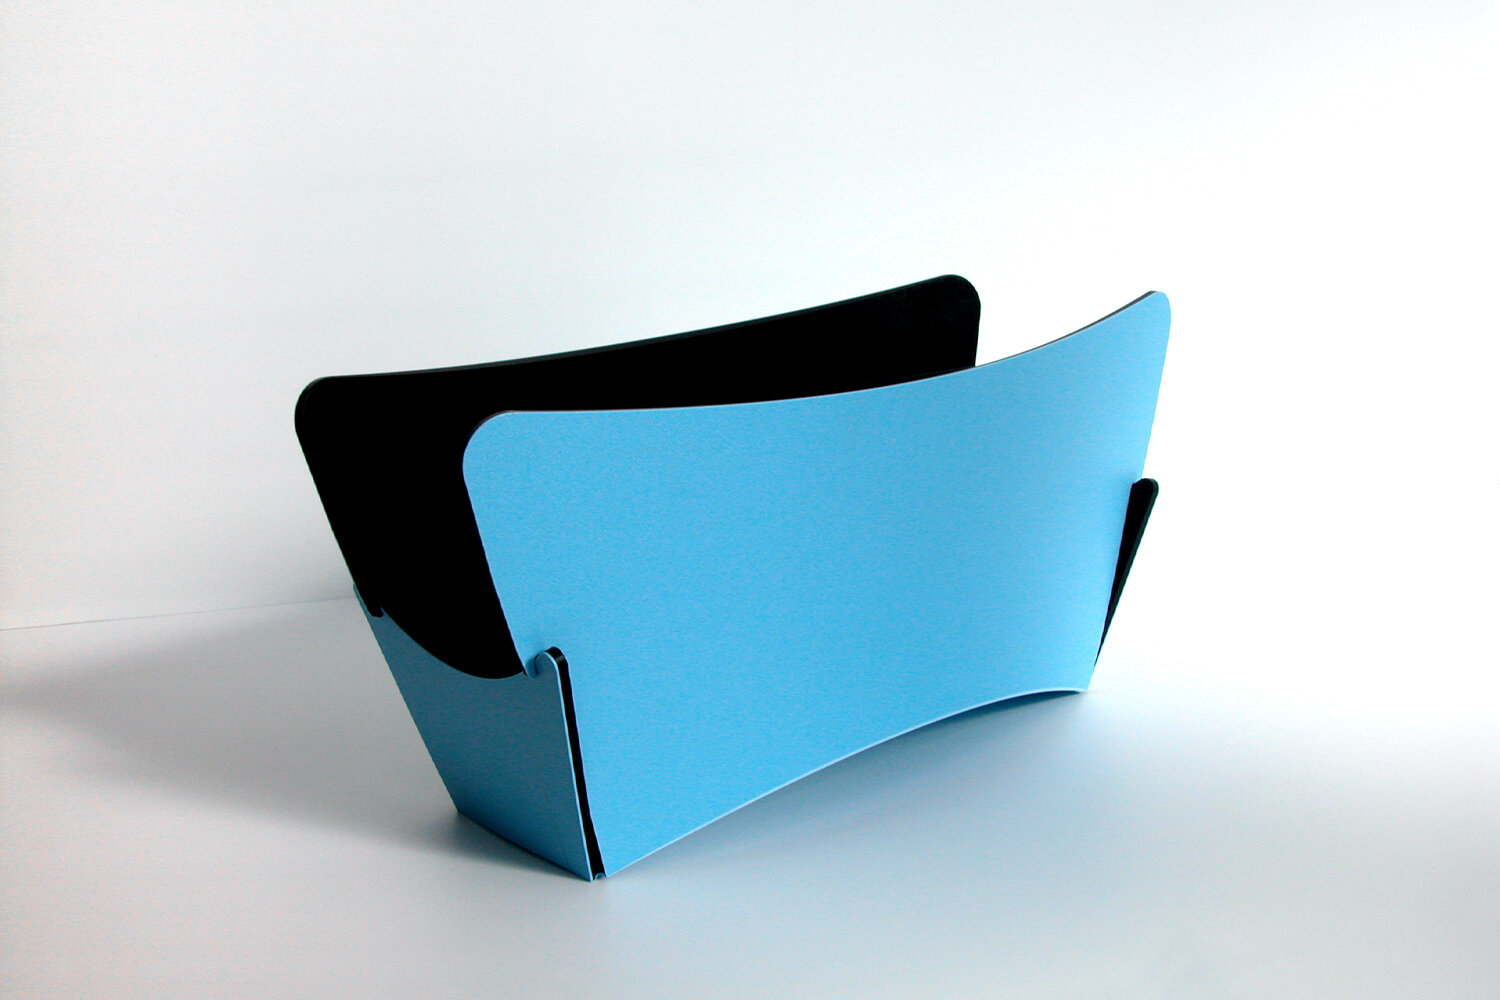 Blue-Marmalade-Crease-foldable-magazine-holder-fan-recycled-plastic-living-room-blue-black-zero-waste-recyclable.jpg